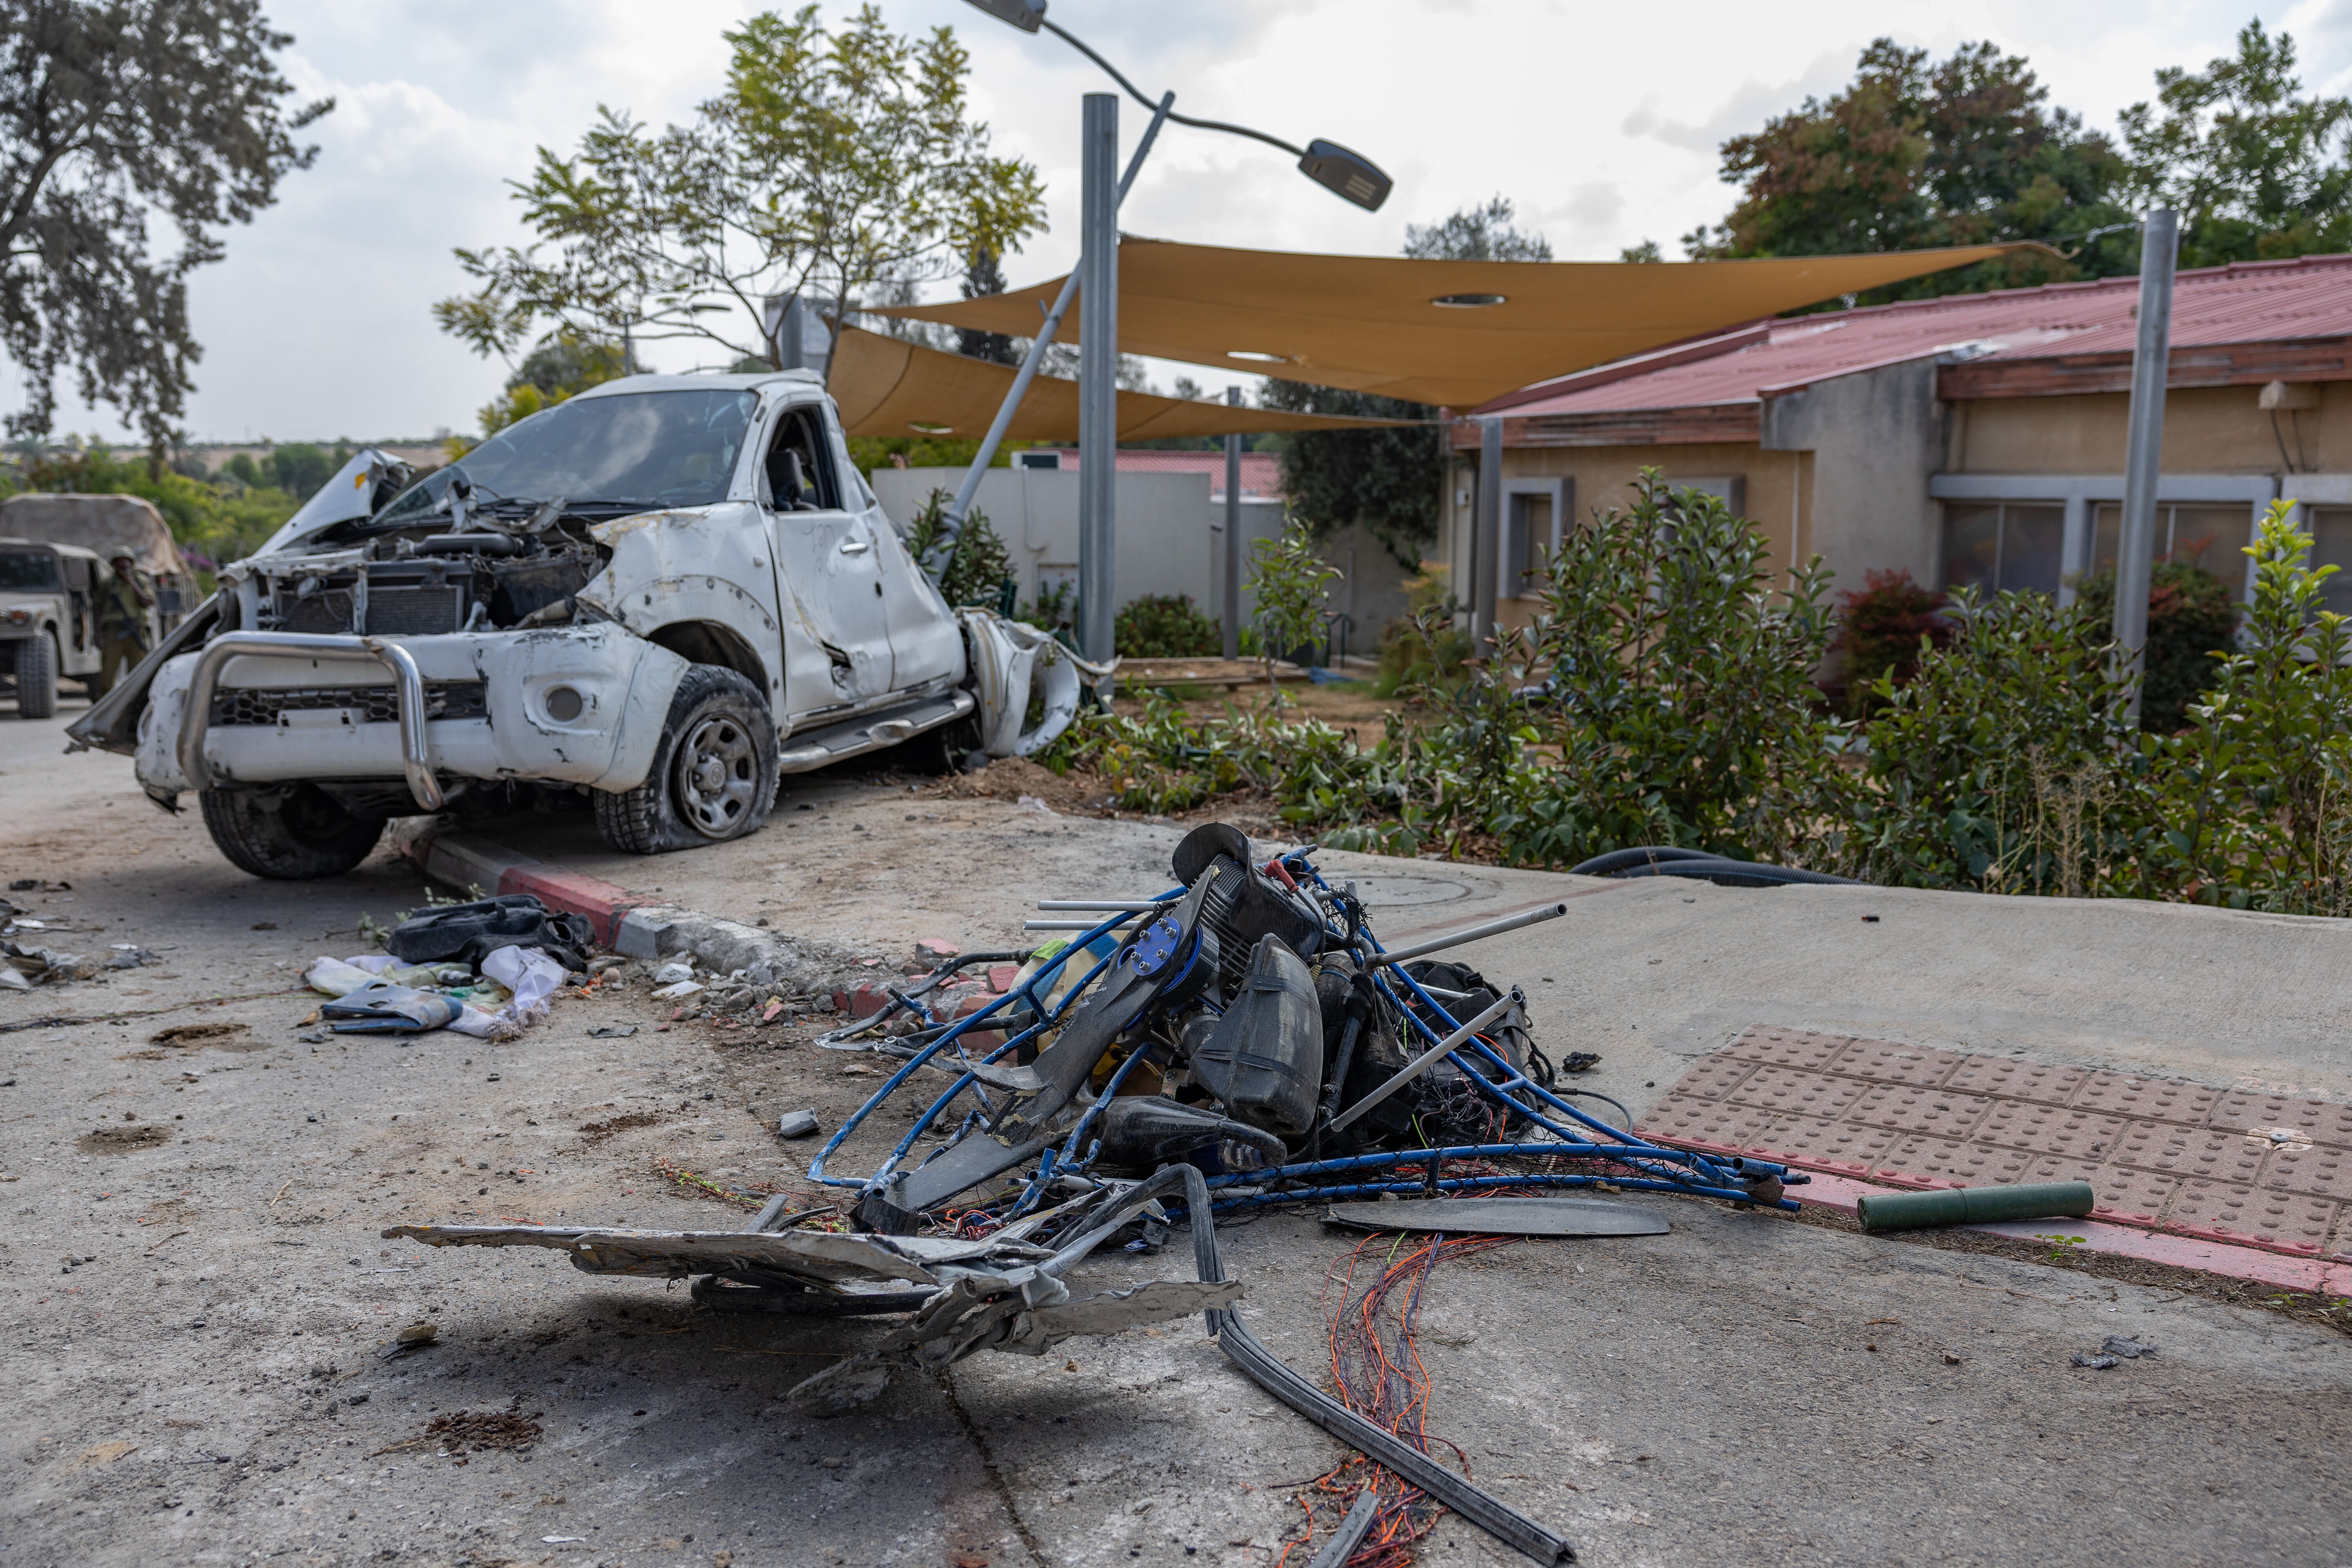 The aftermath of the Hamas attack on Kfar Aza